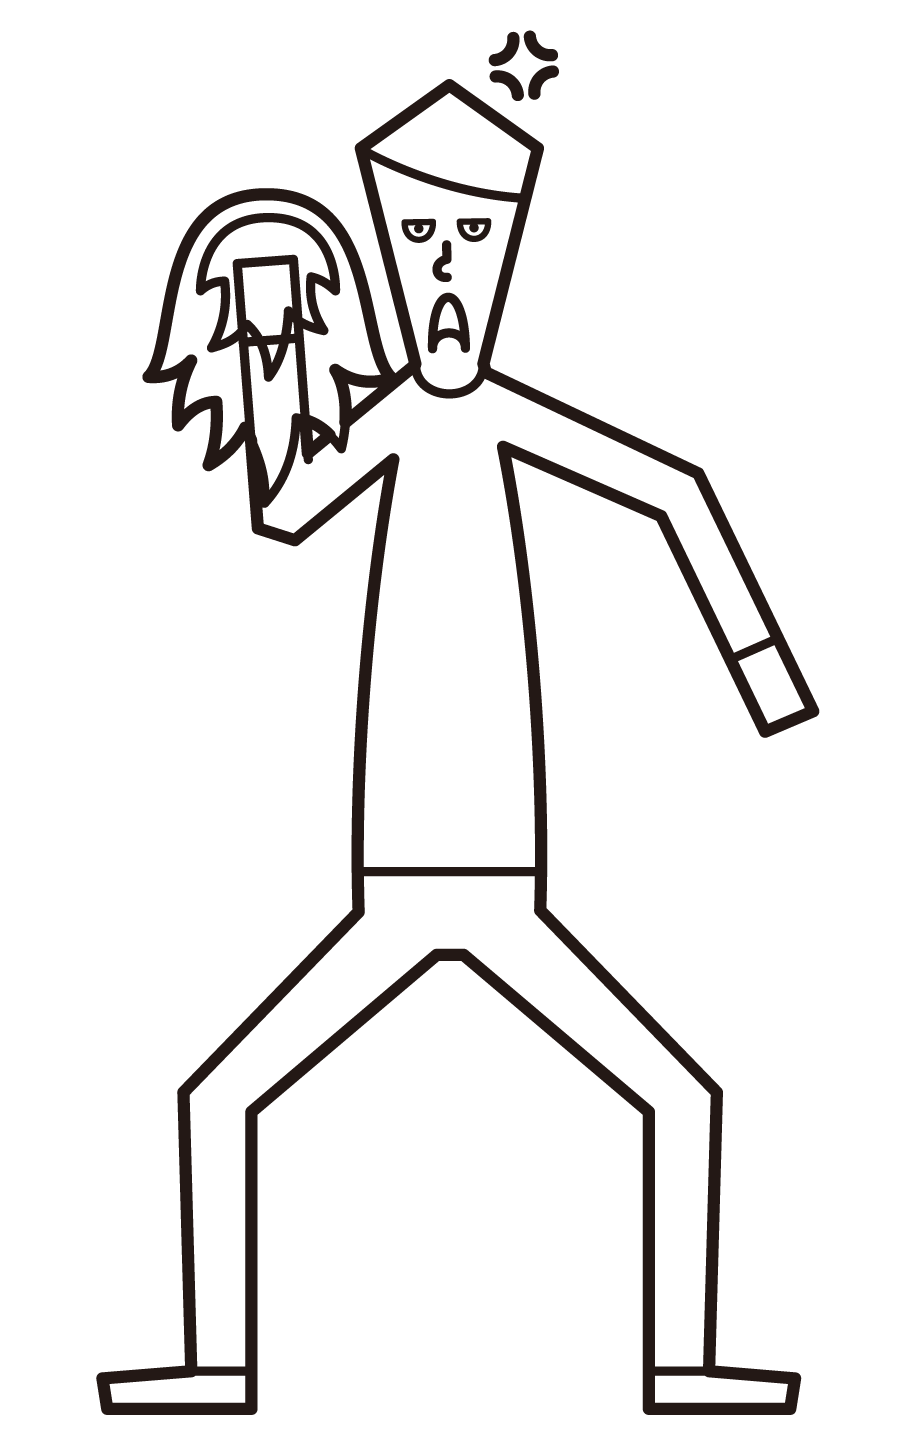 Illustration of a man who burns in anger